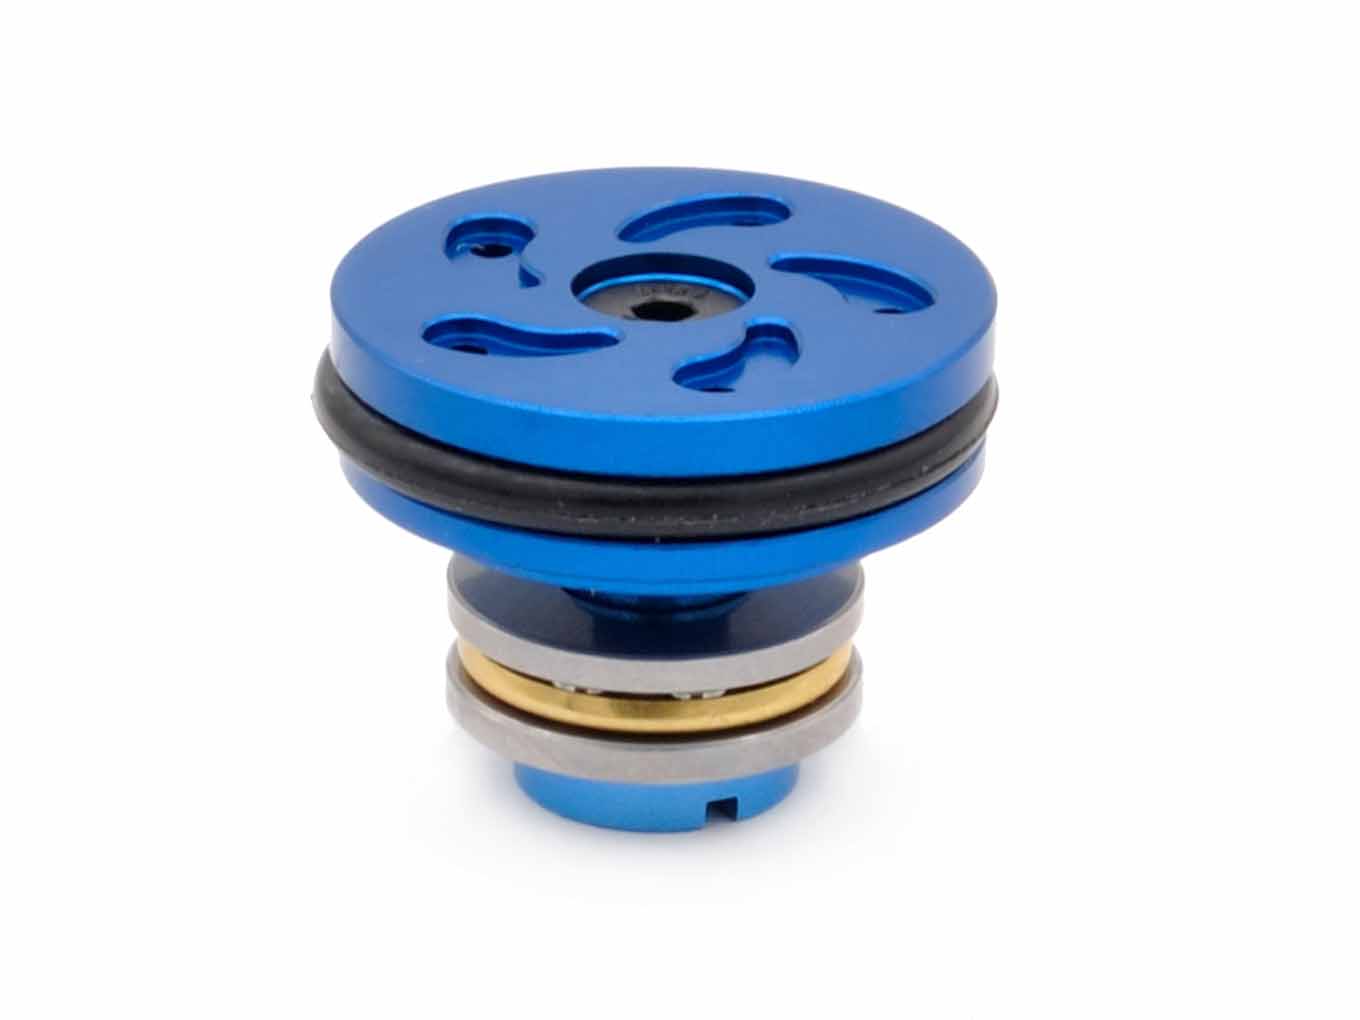 AOLS Piston Head with ball bearing Cyclone Type - Blue